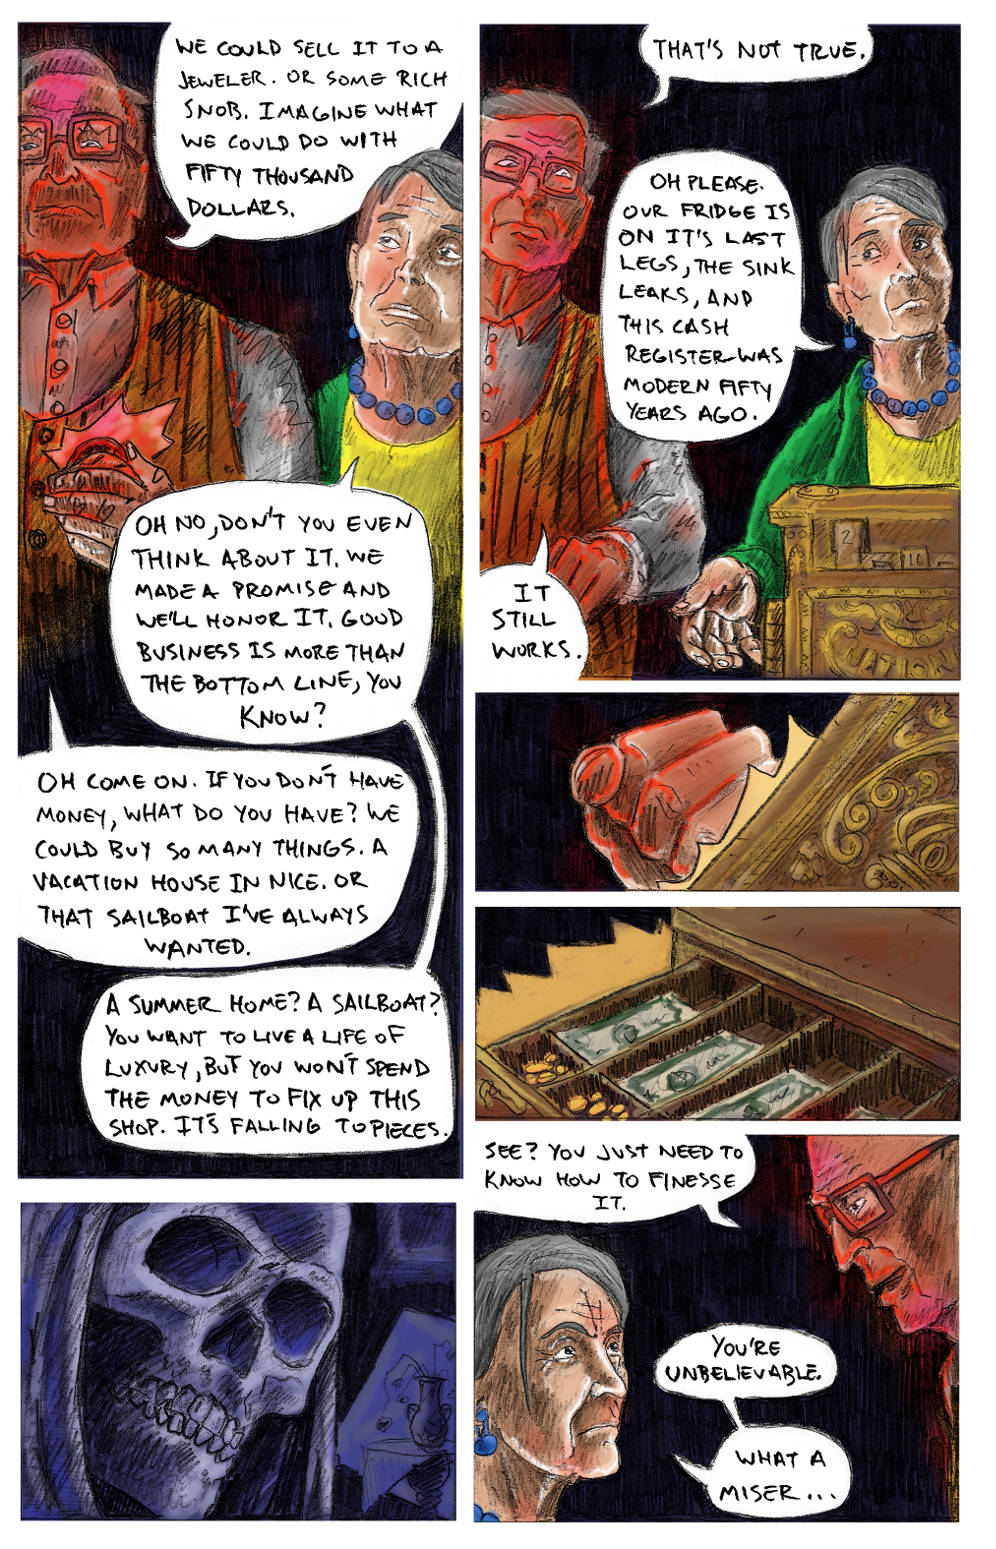 Page 16. Please enable images to read the comics :)